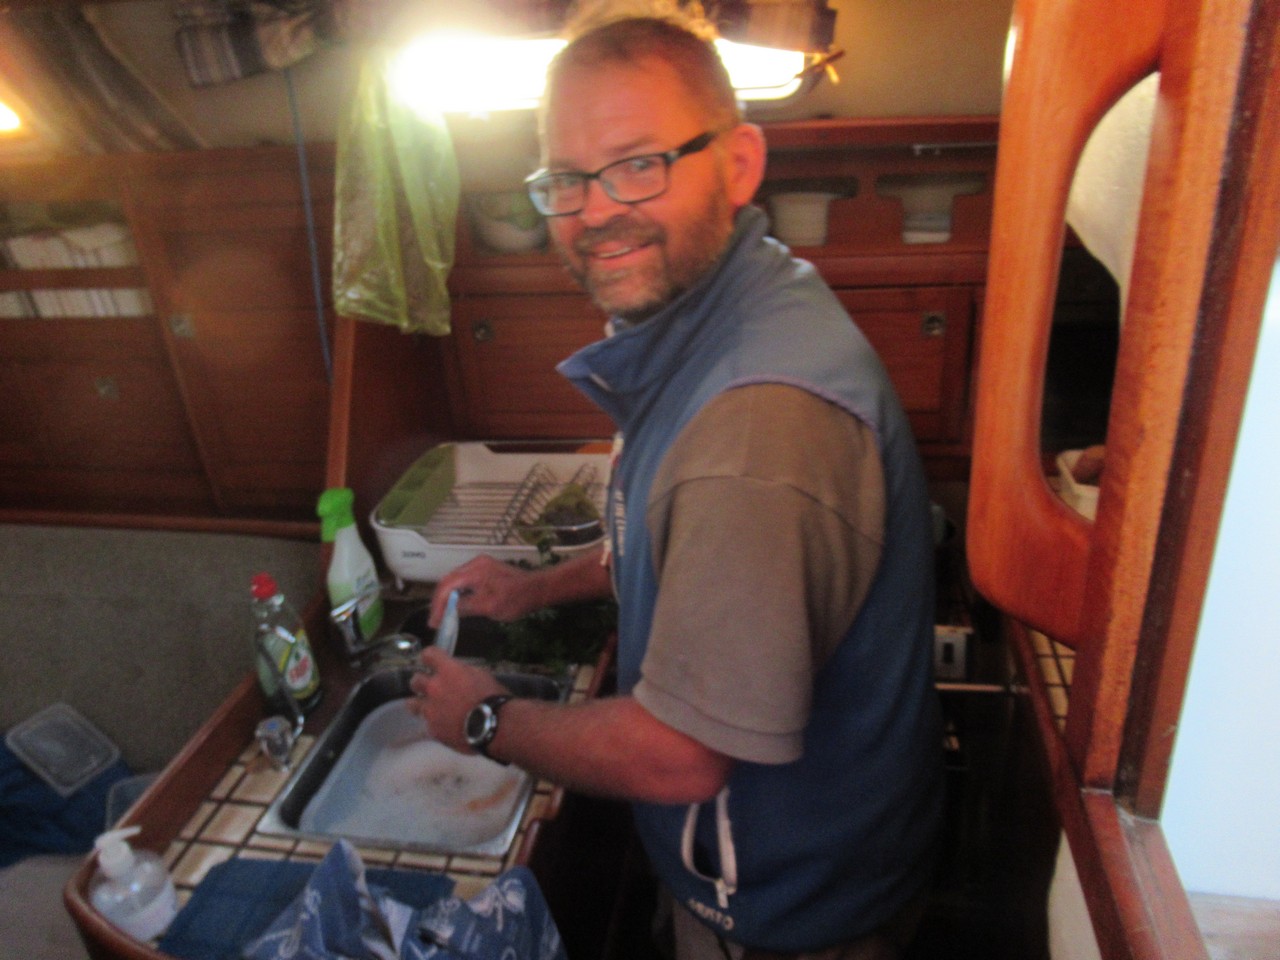 Iain gets all domestic while offshore.